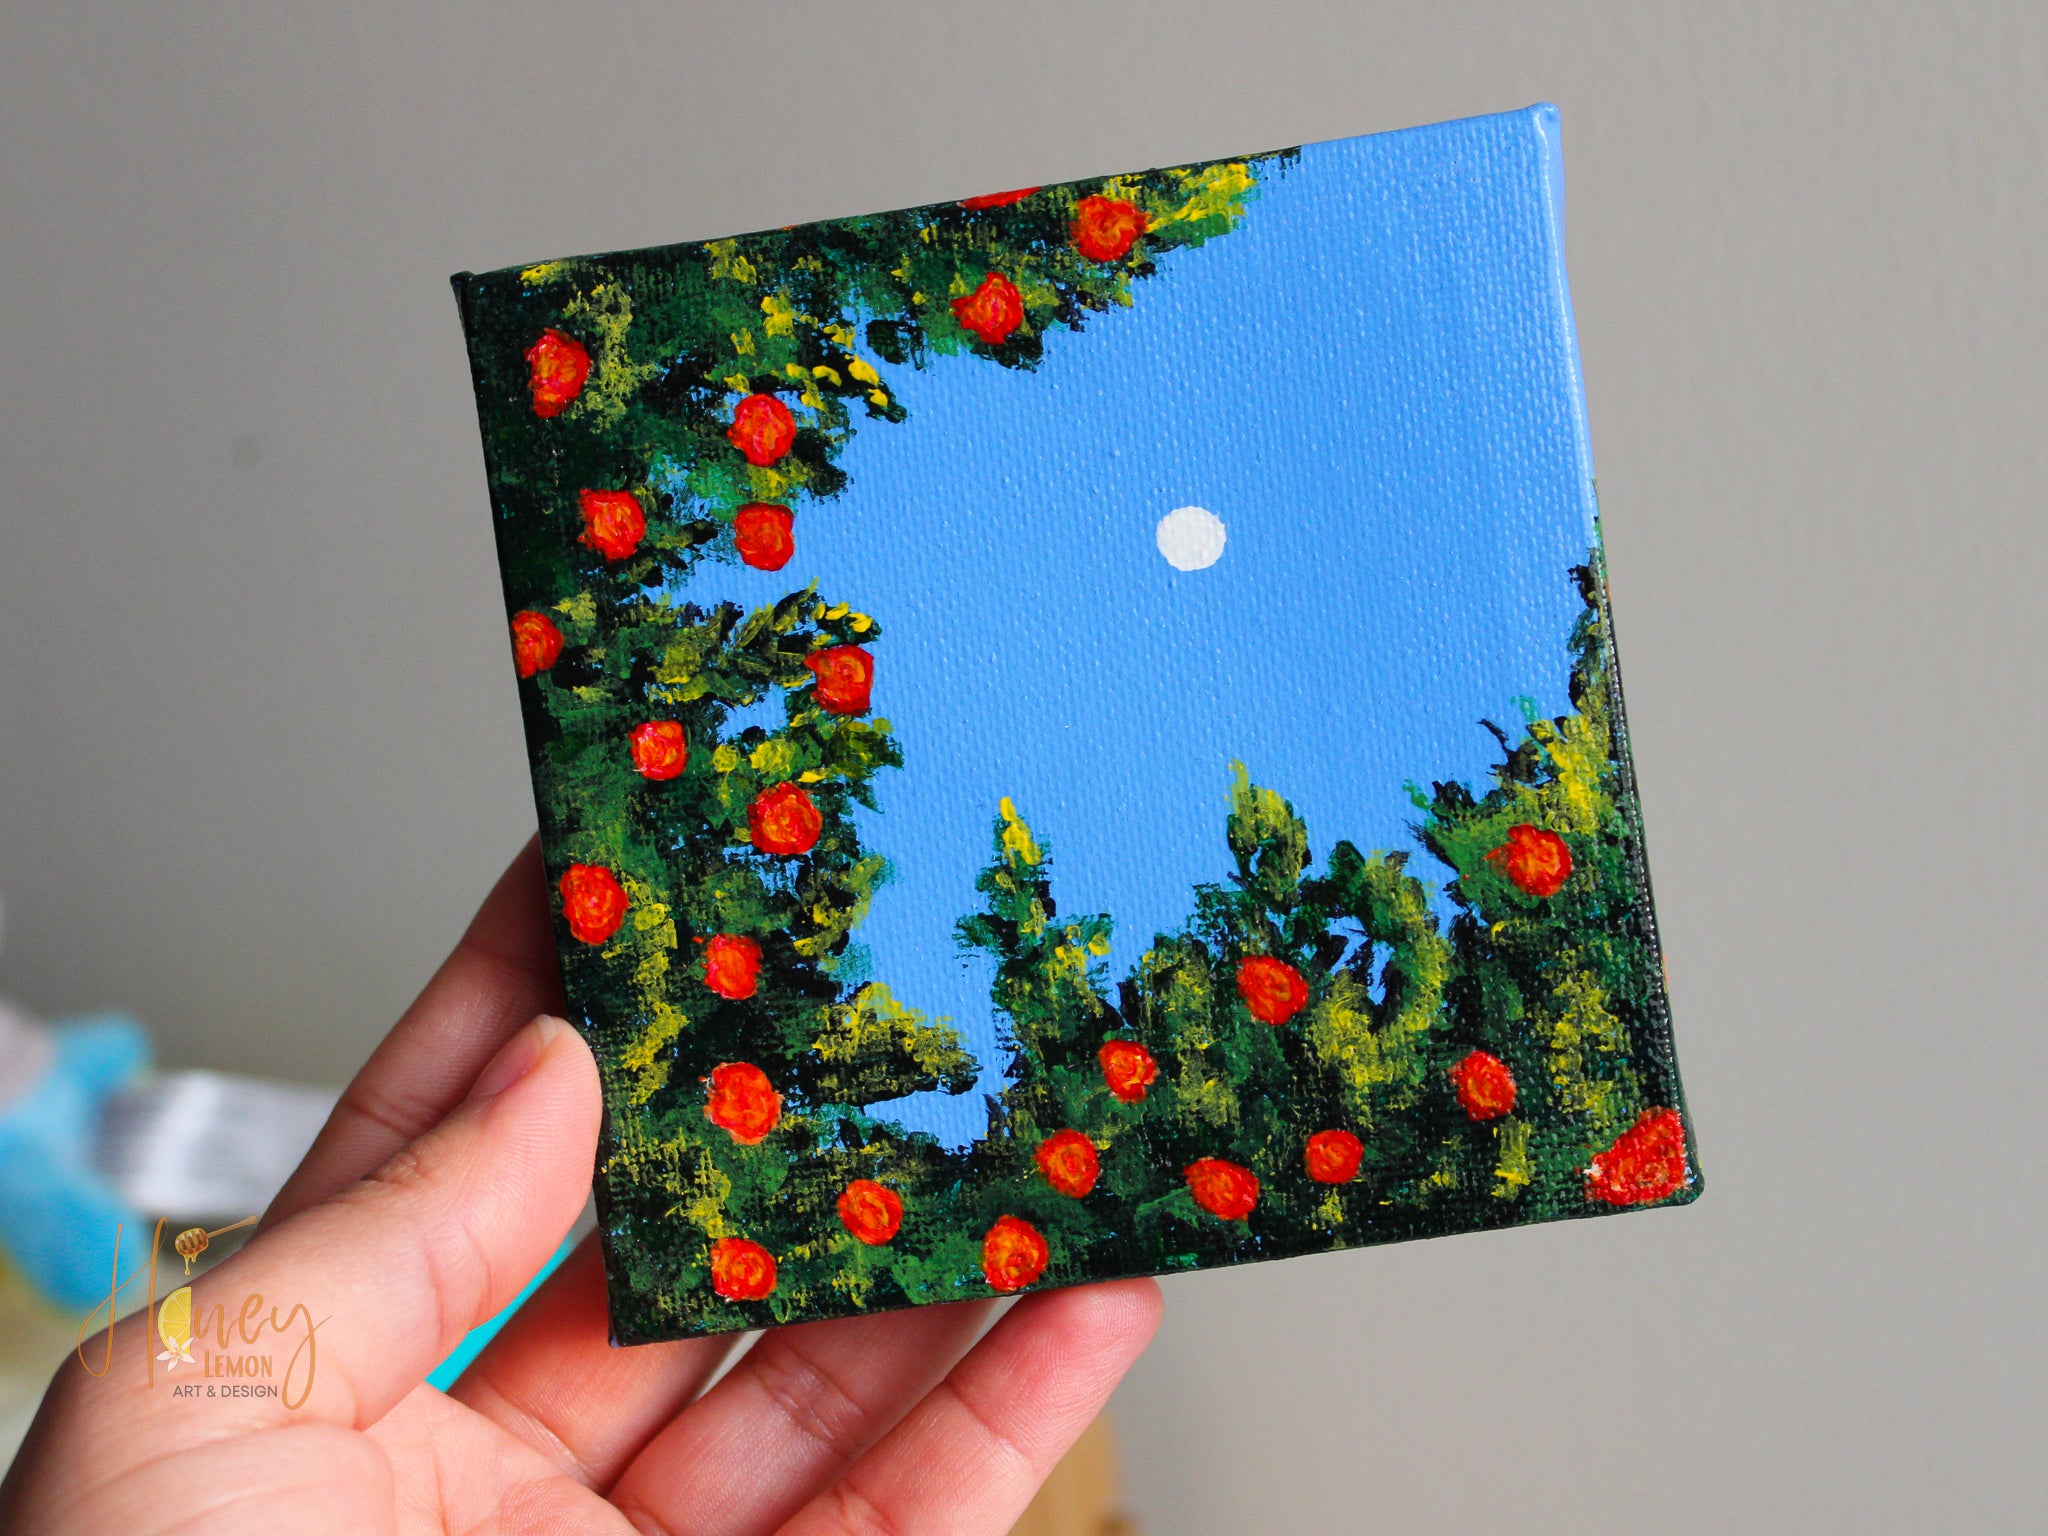 MINI CANVAS Sky and red flowers 4x4 inches.